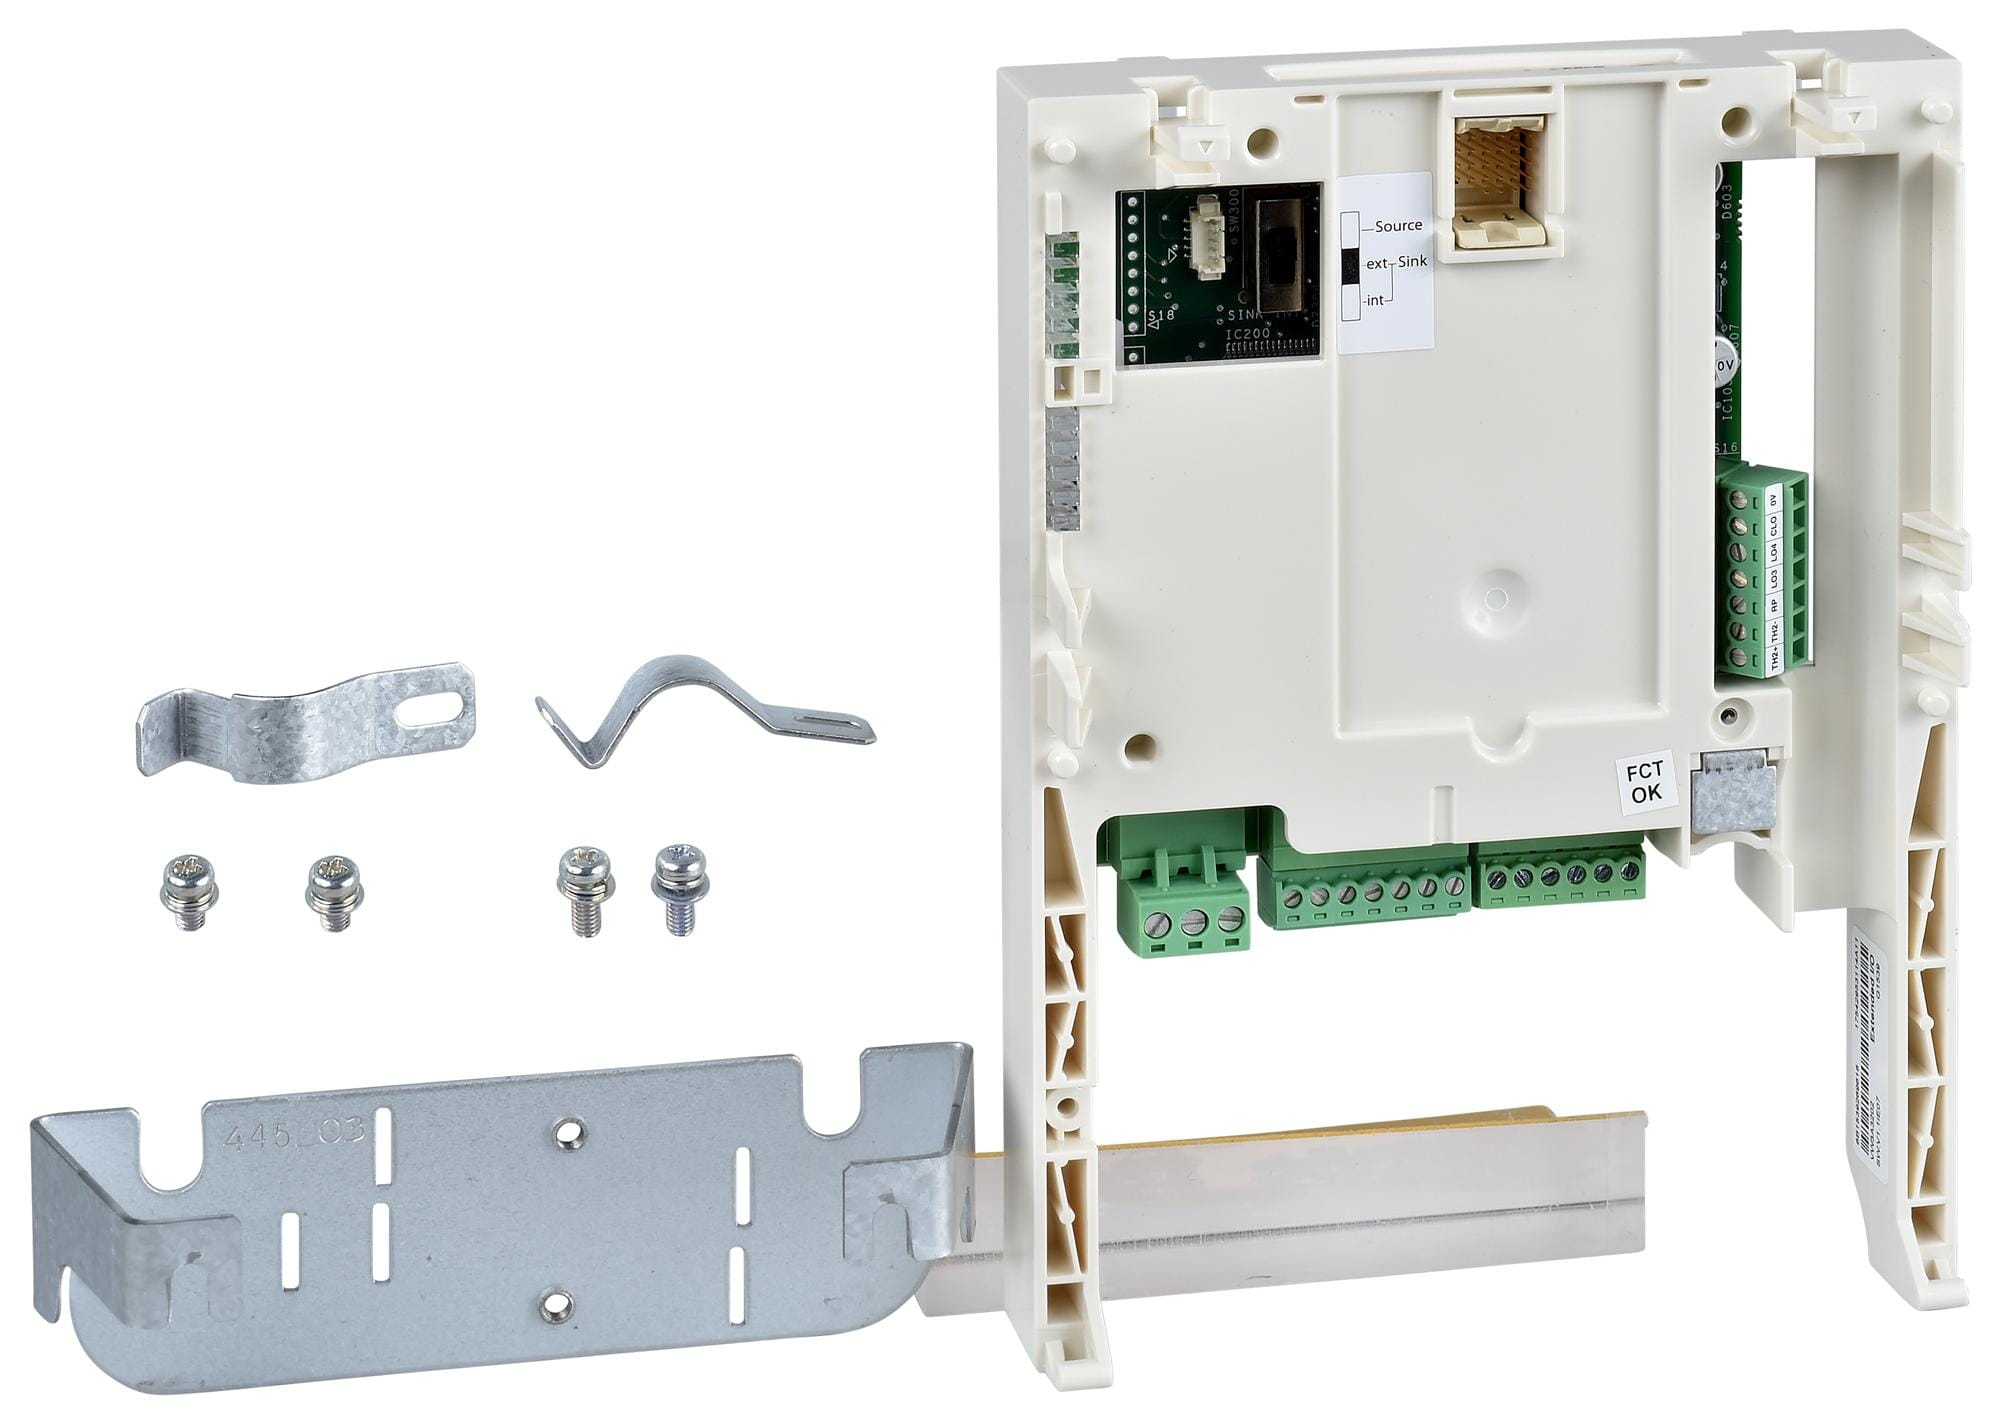 SCHNEIDER ELECTRIC Accessories VW3A3202 EXTENDED I/O CARD, VARIABLE SPEED DRIVE SCHNEIDER ELECTRIC 3110669 VW3A3202